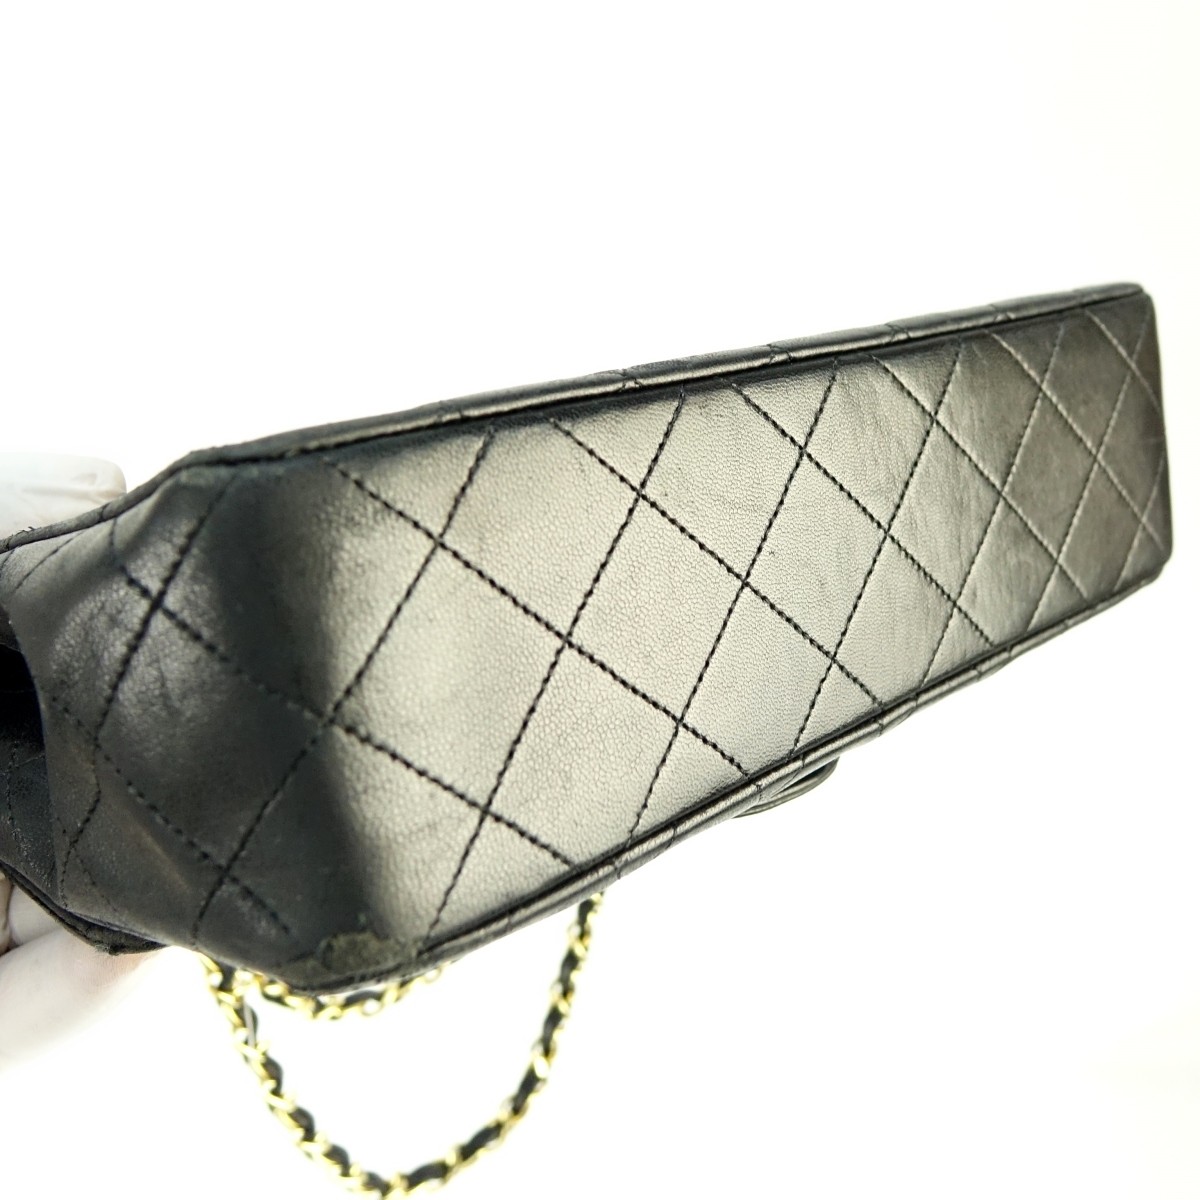 Chanel Black Quilted Leather Double Flap Bag 23